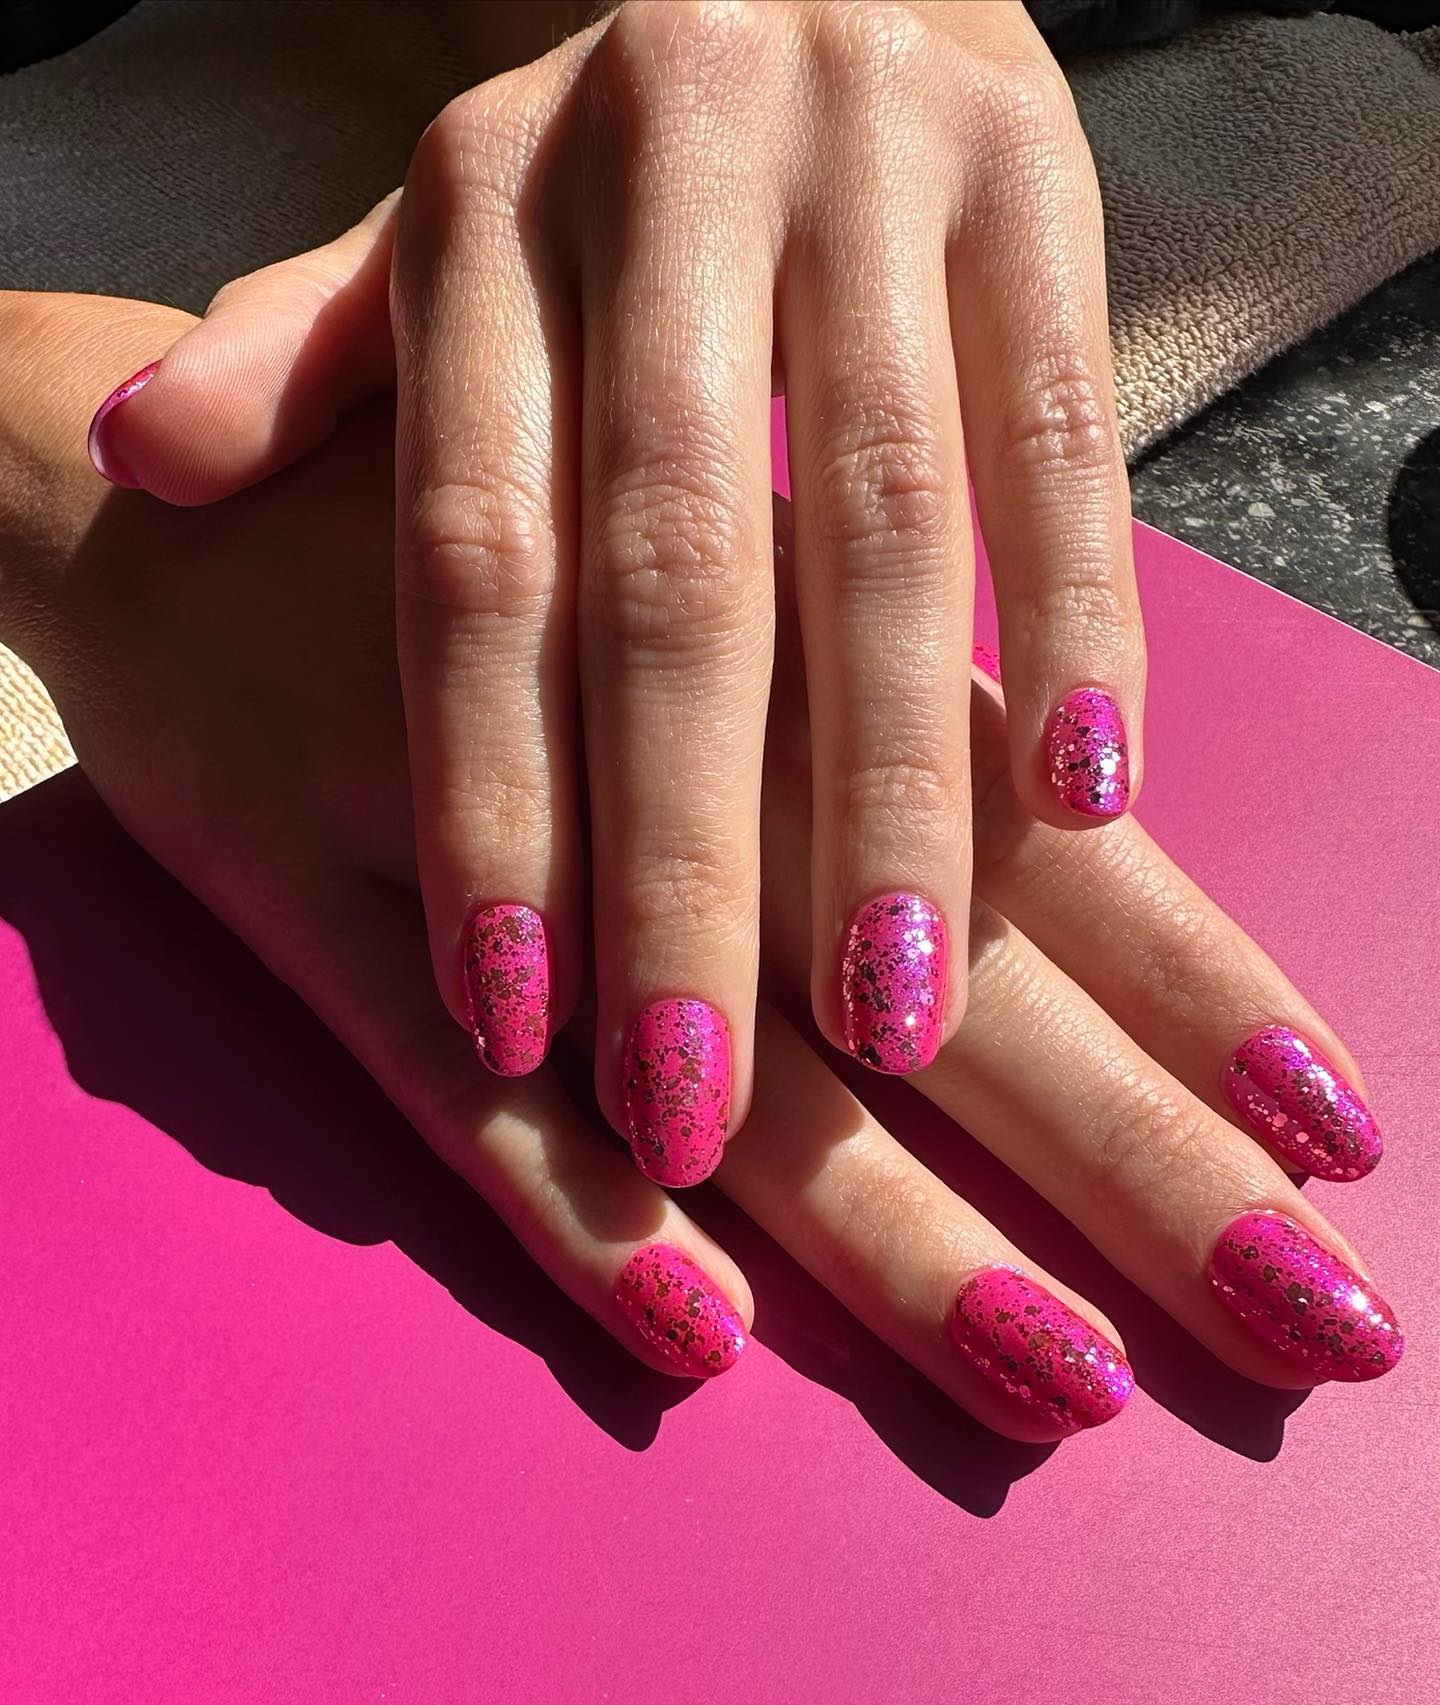 Barbiecore is trending: Here are the hottest pink nail designs